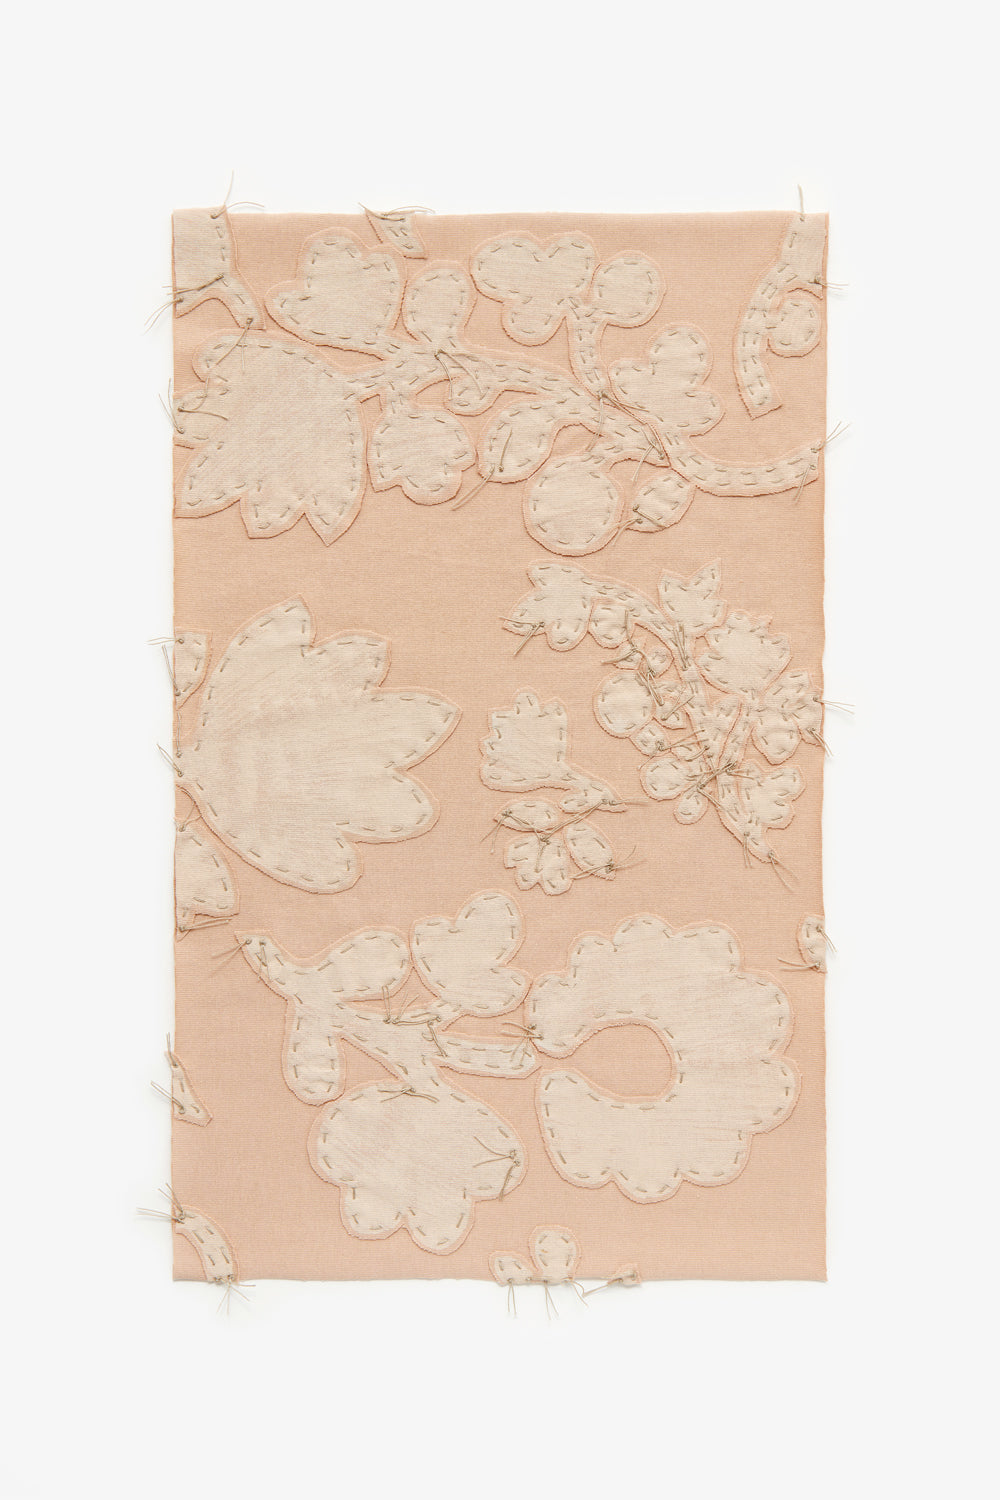 Swatch featuring floral appliqué and embroidery on vetiver pink fabric.